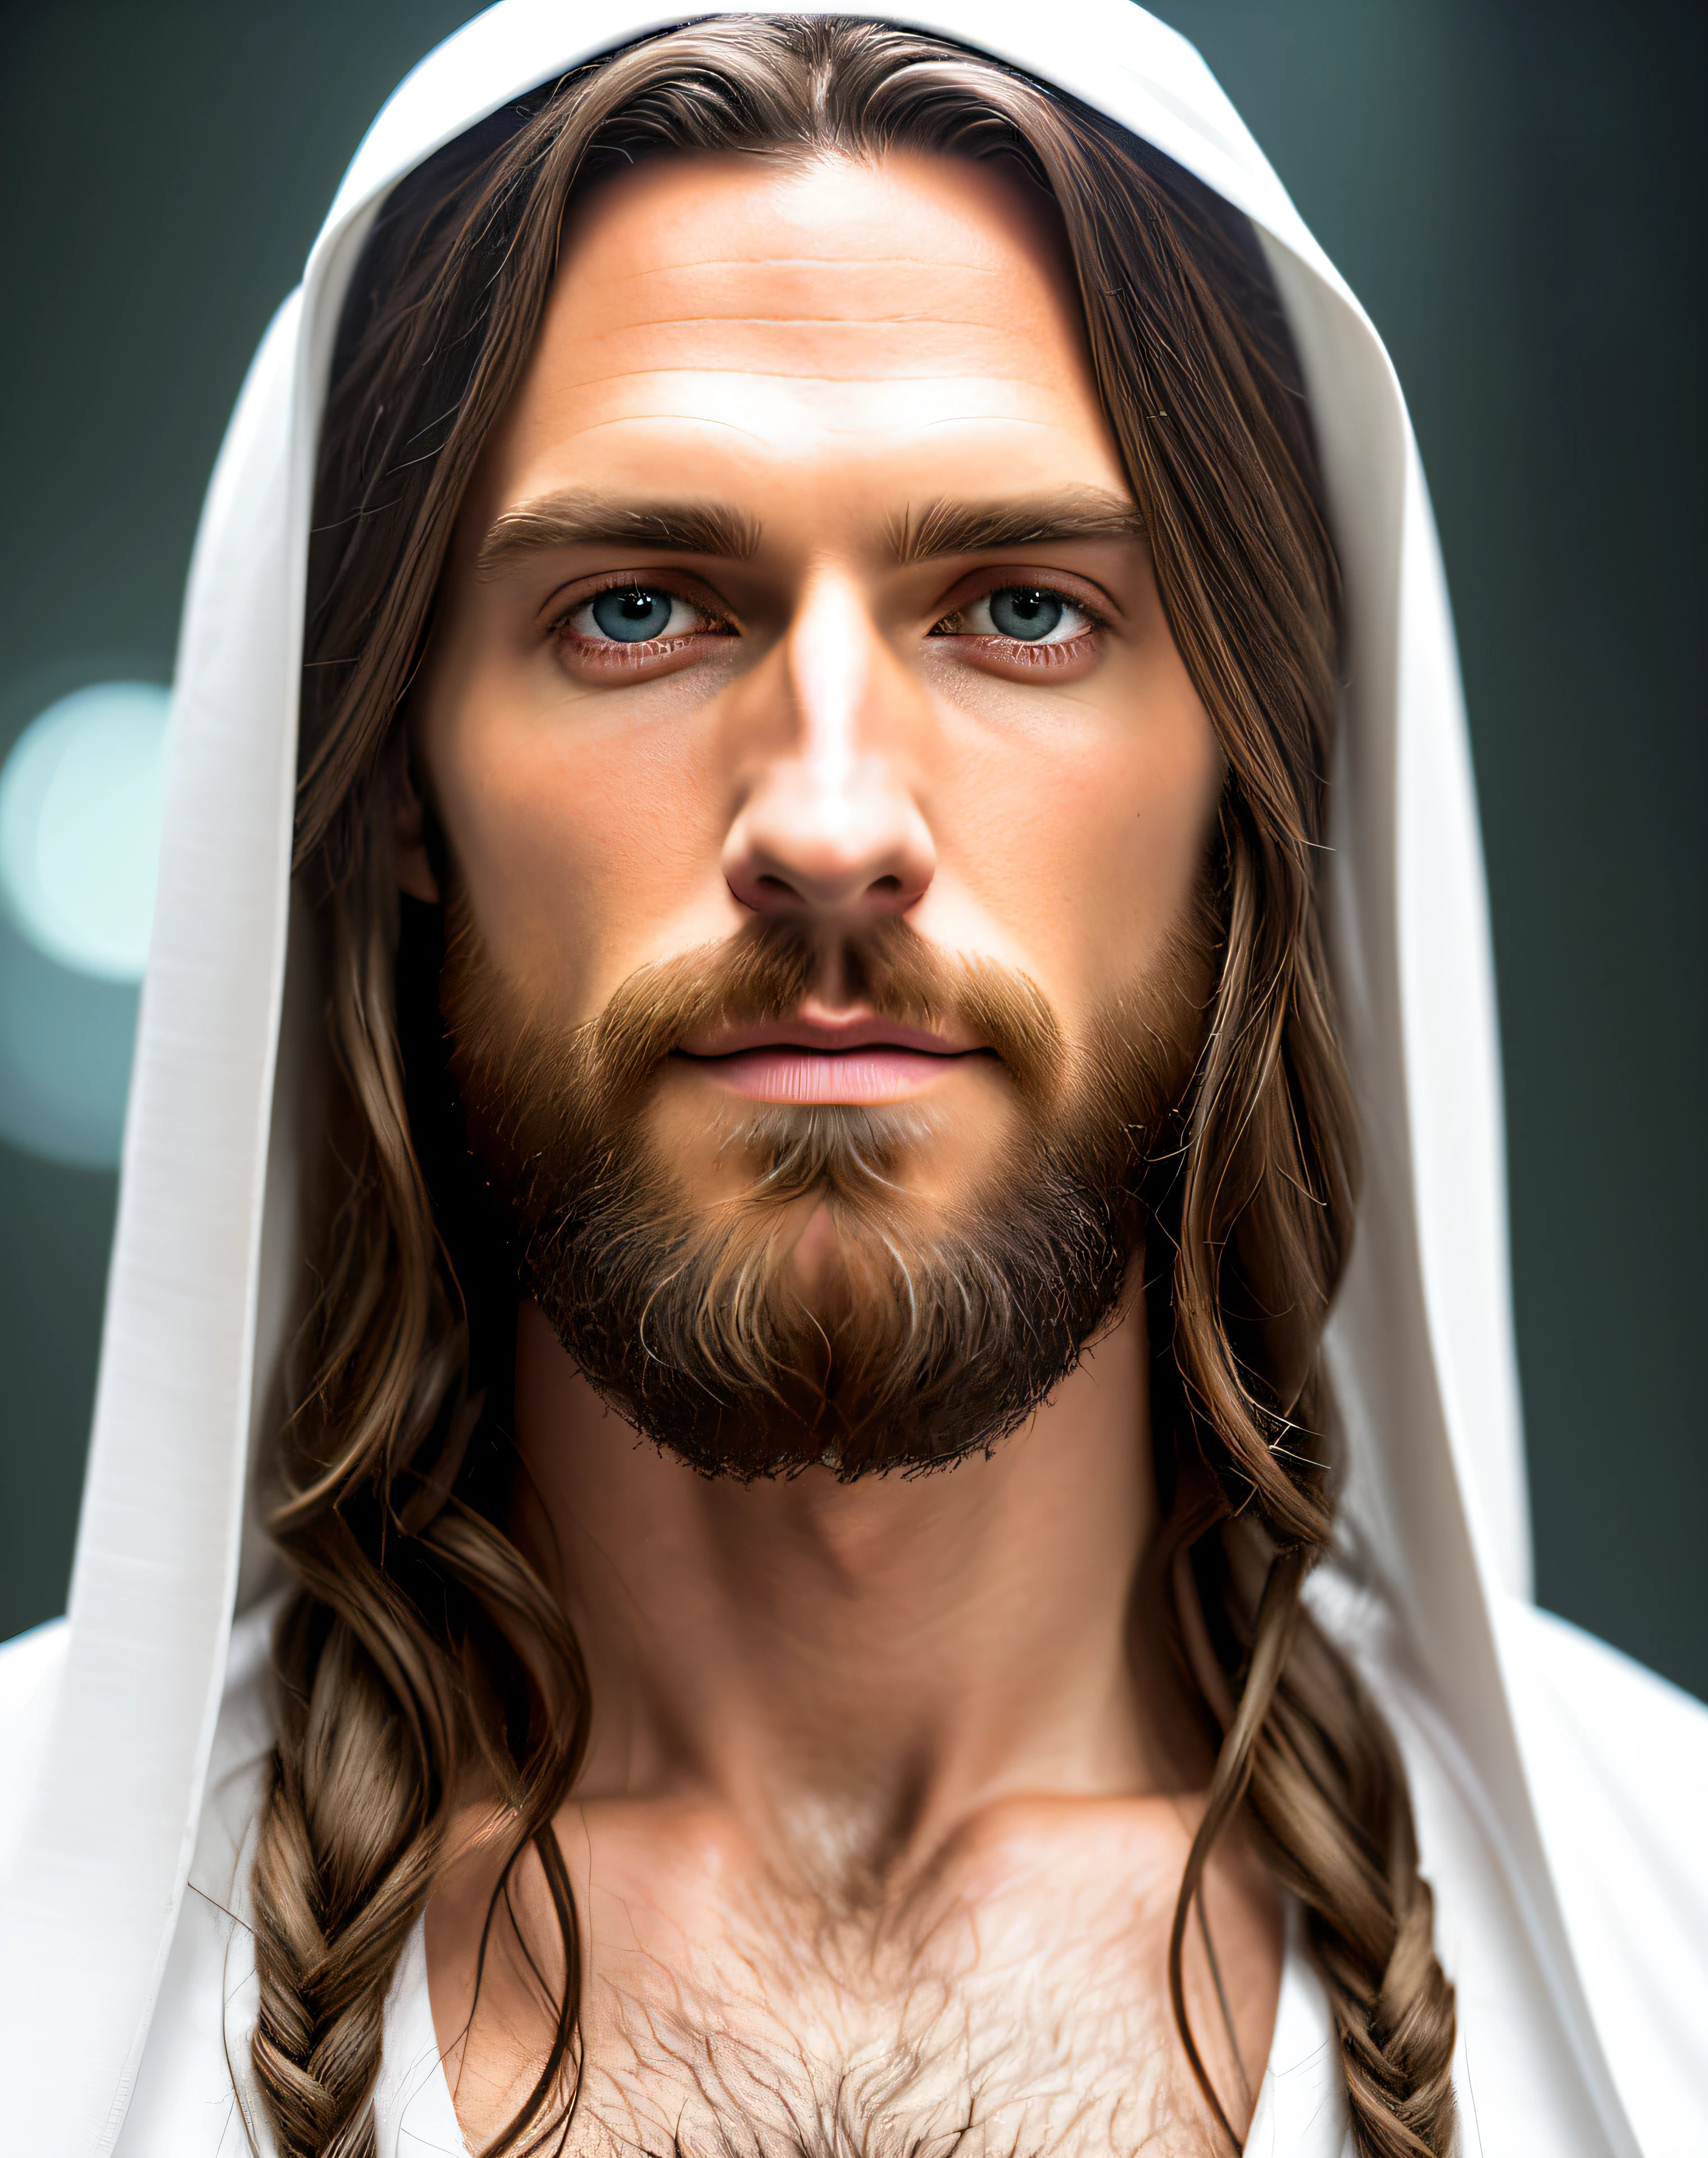 (Symmetrie),Zentriert,A ((Schließen)) up portrAit,(Jesus),A very thin white mAn with long hAir And A beArd,weAring A long white robe,35mm,nAturAl skin,clothes  detAil, 8k Textur, 8k, insAne detAils, intricAte detAils, hyperdetAiledhighly detAiled,reAlistic,soft cinemAtic light,HDR,shArp focus, ((((cinemAtic look)))),intricAte, elegAnt, highly detAiled